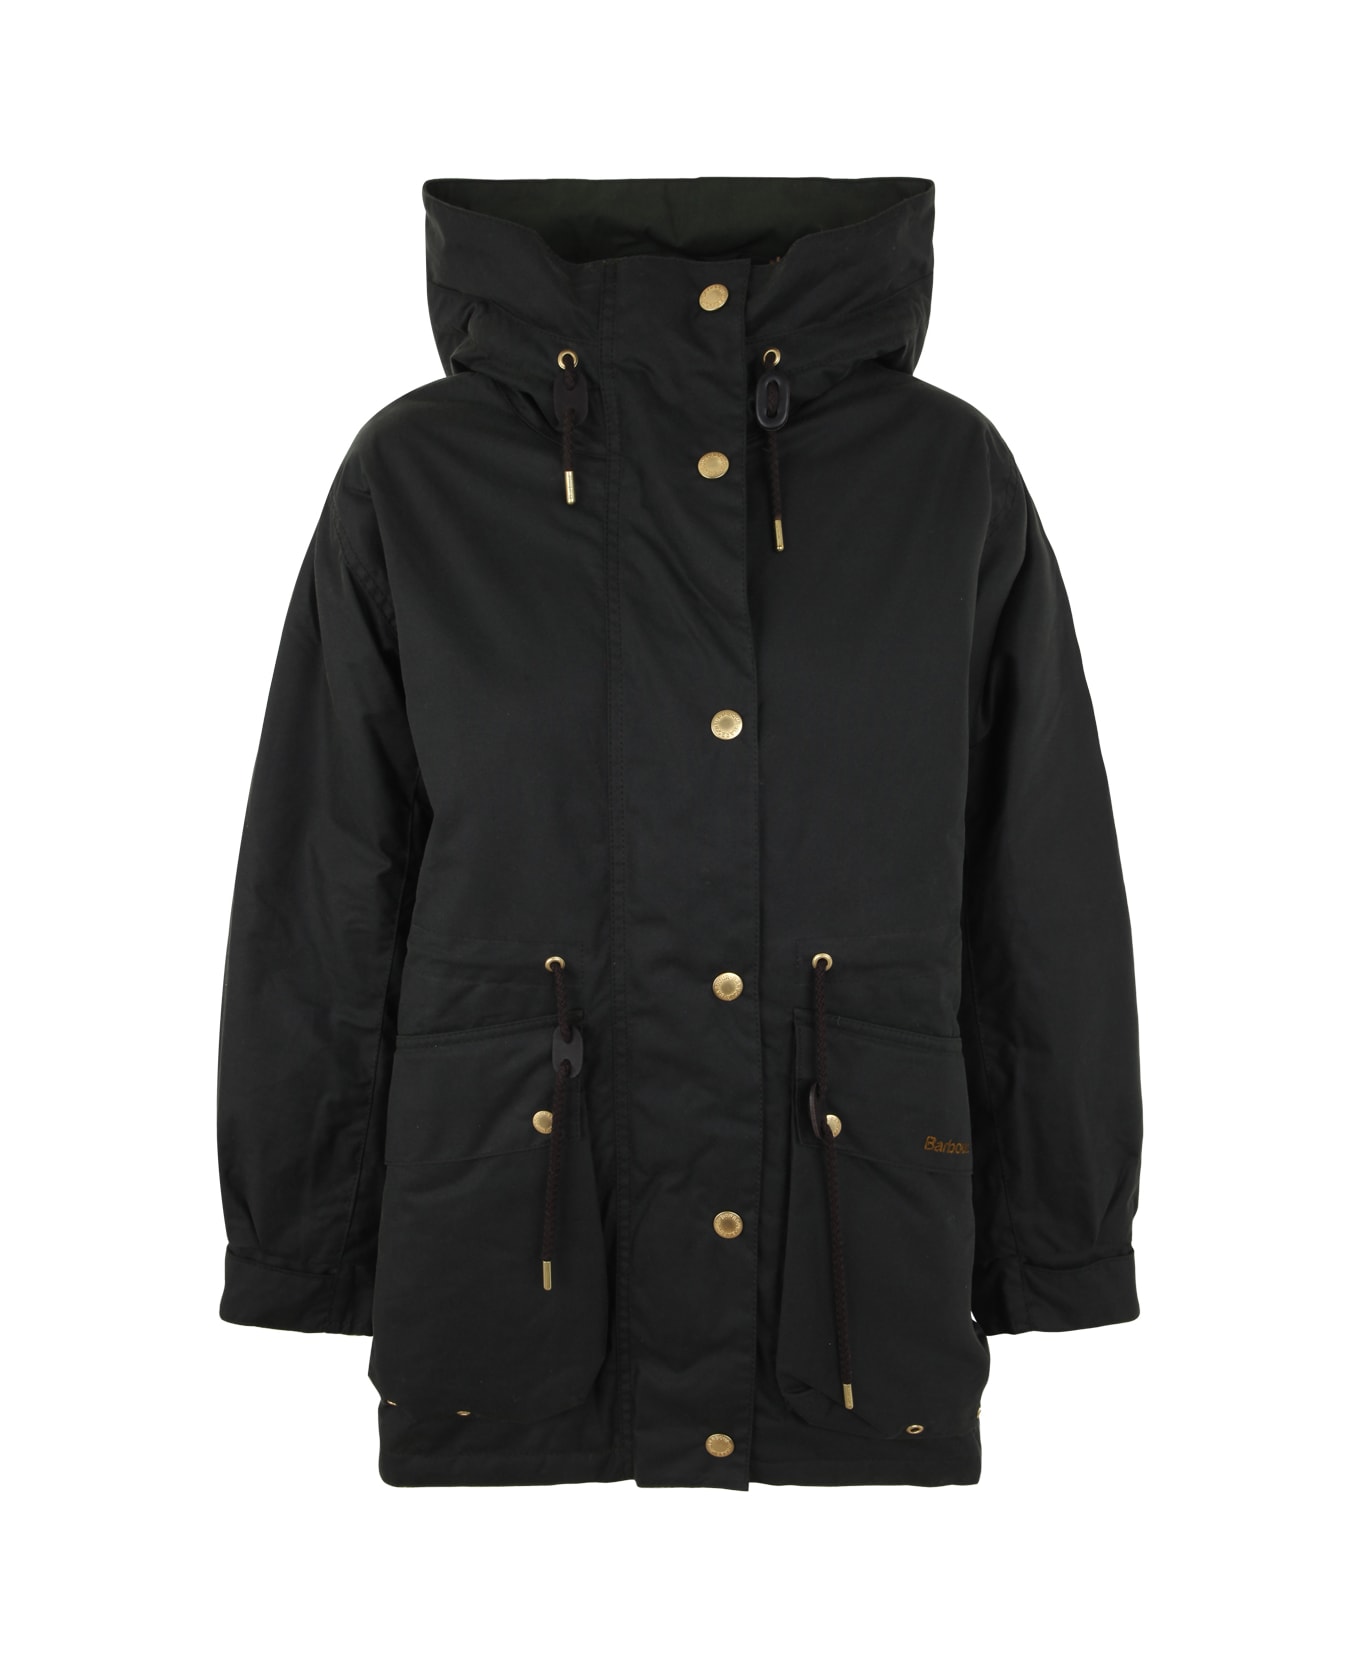 Barbour Grantley Cotton Wax Outwear - Sage Classic